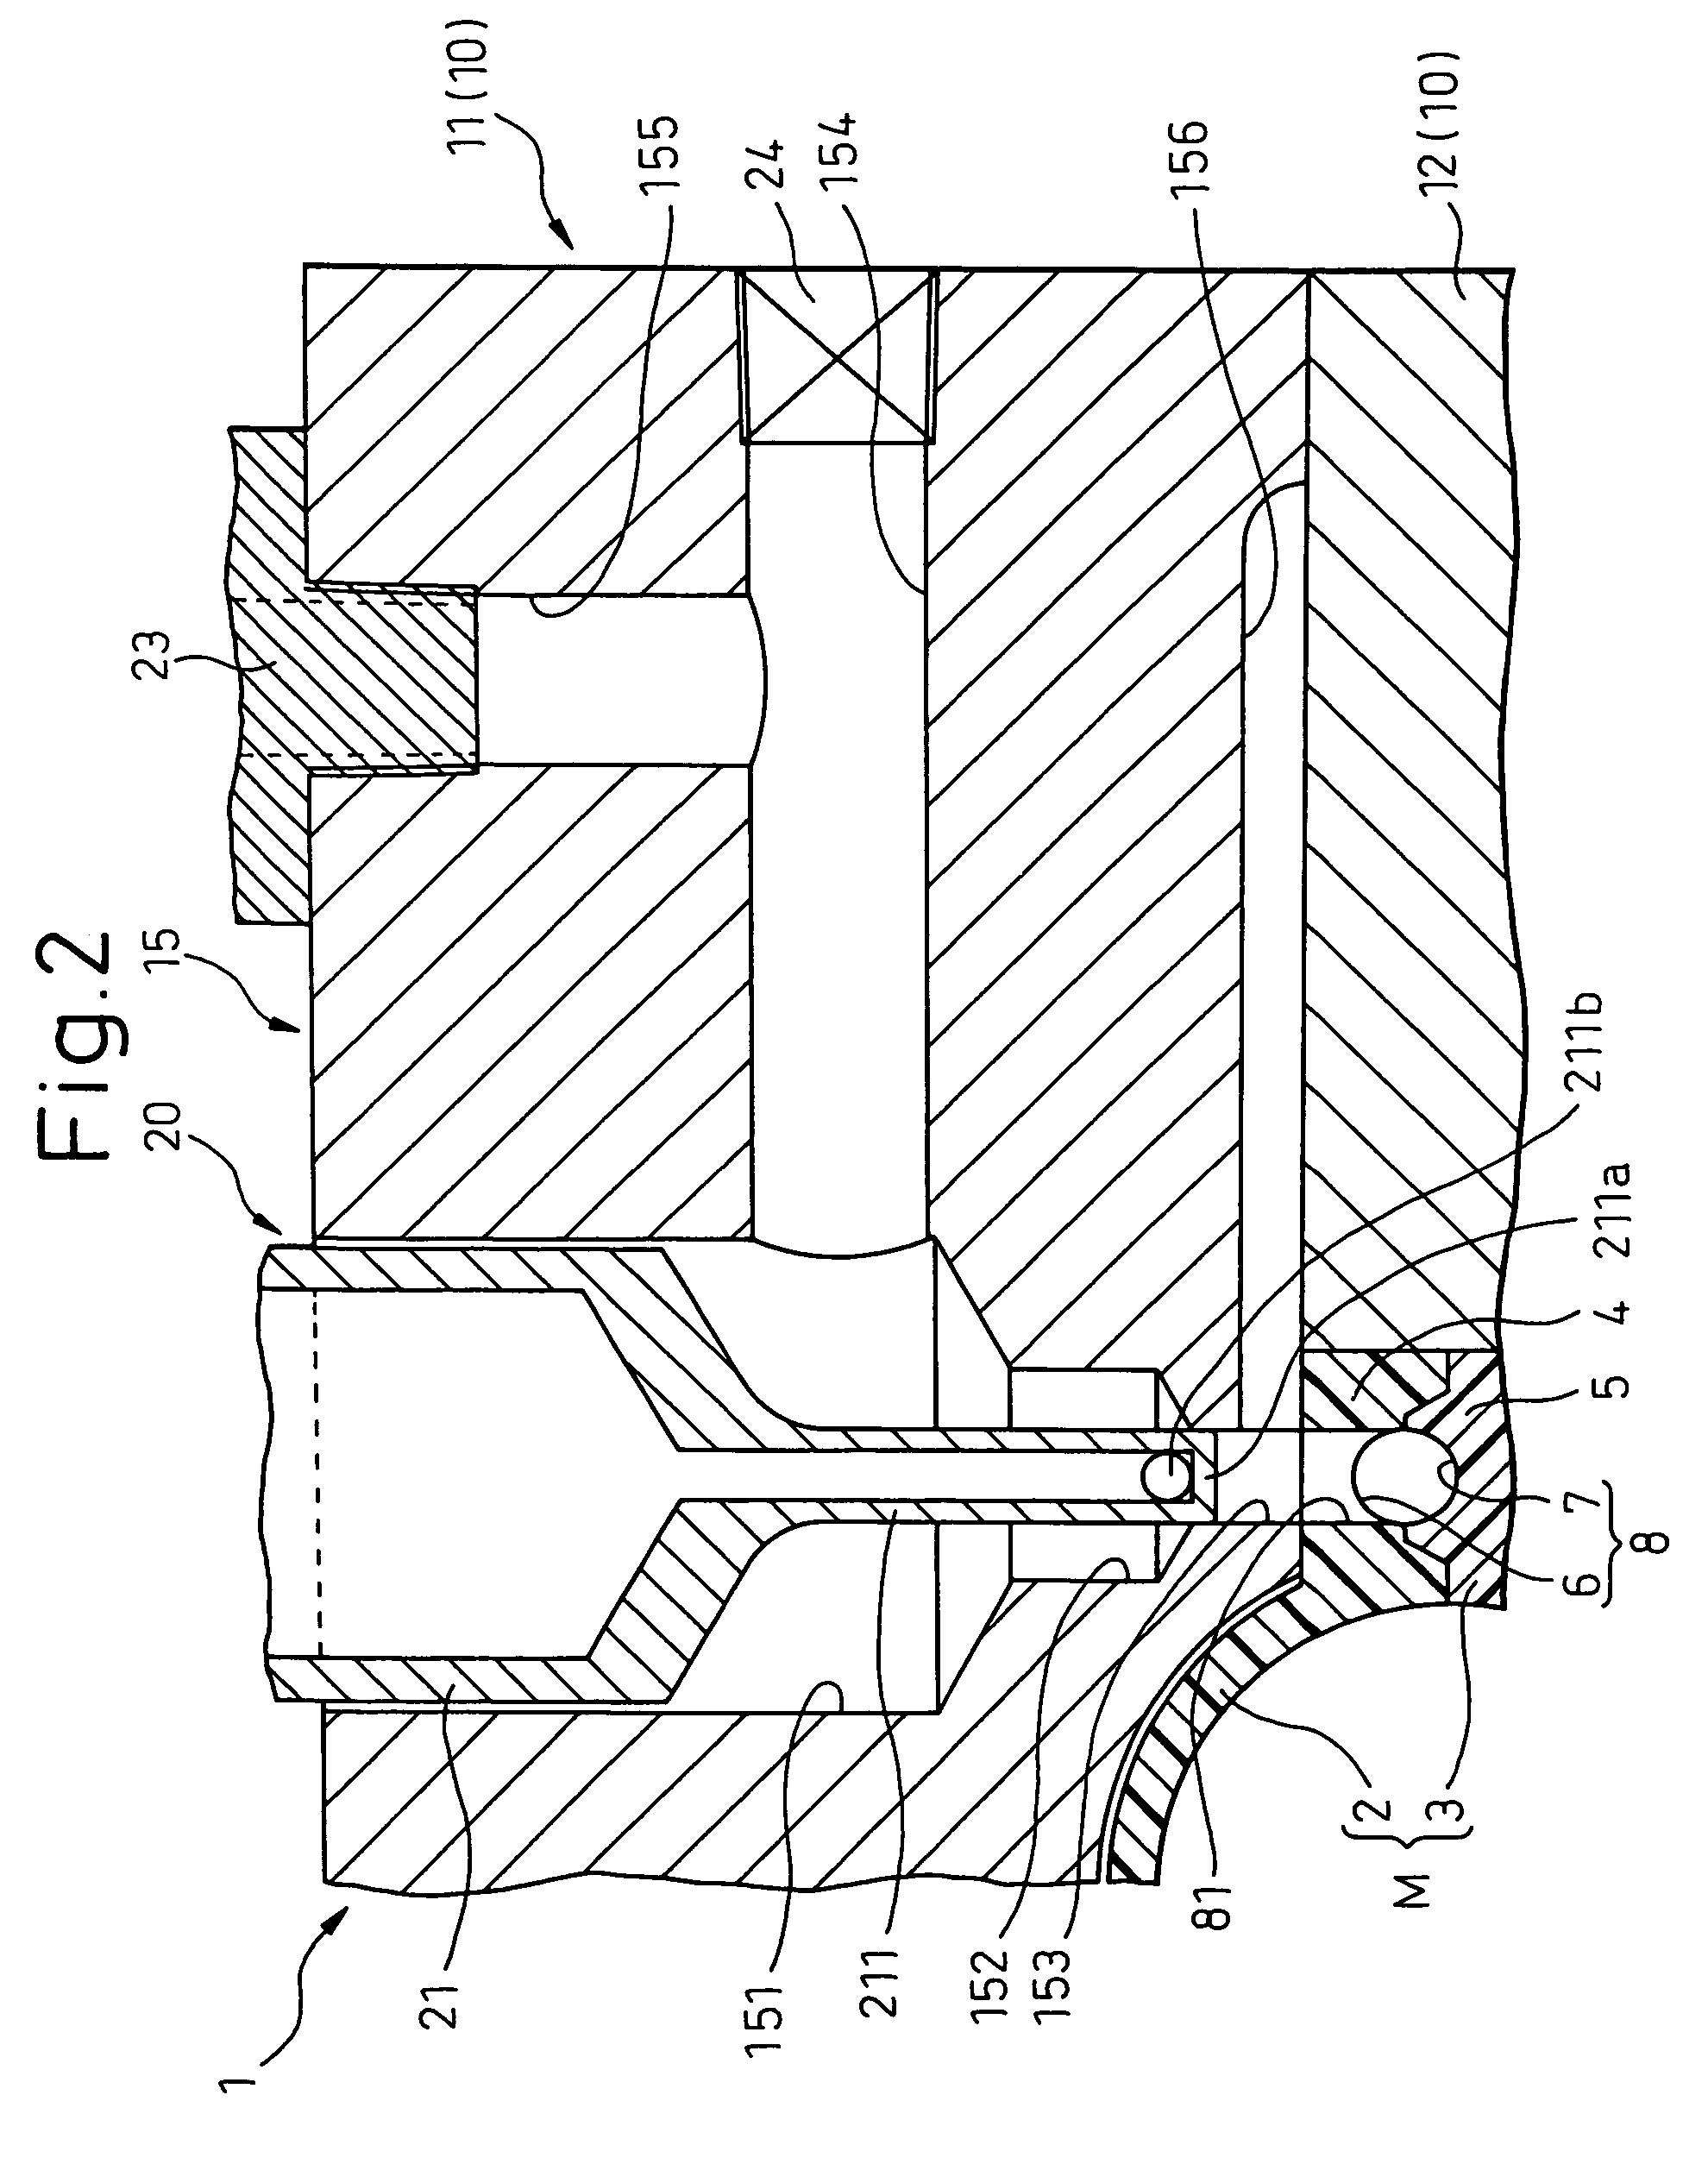 Heated medium supplying method and structure for secondary molding of resin molded component